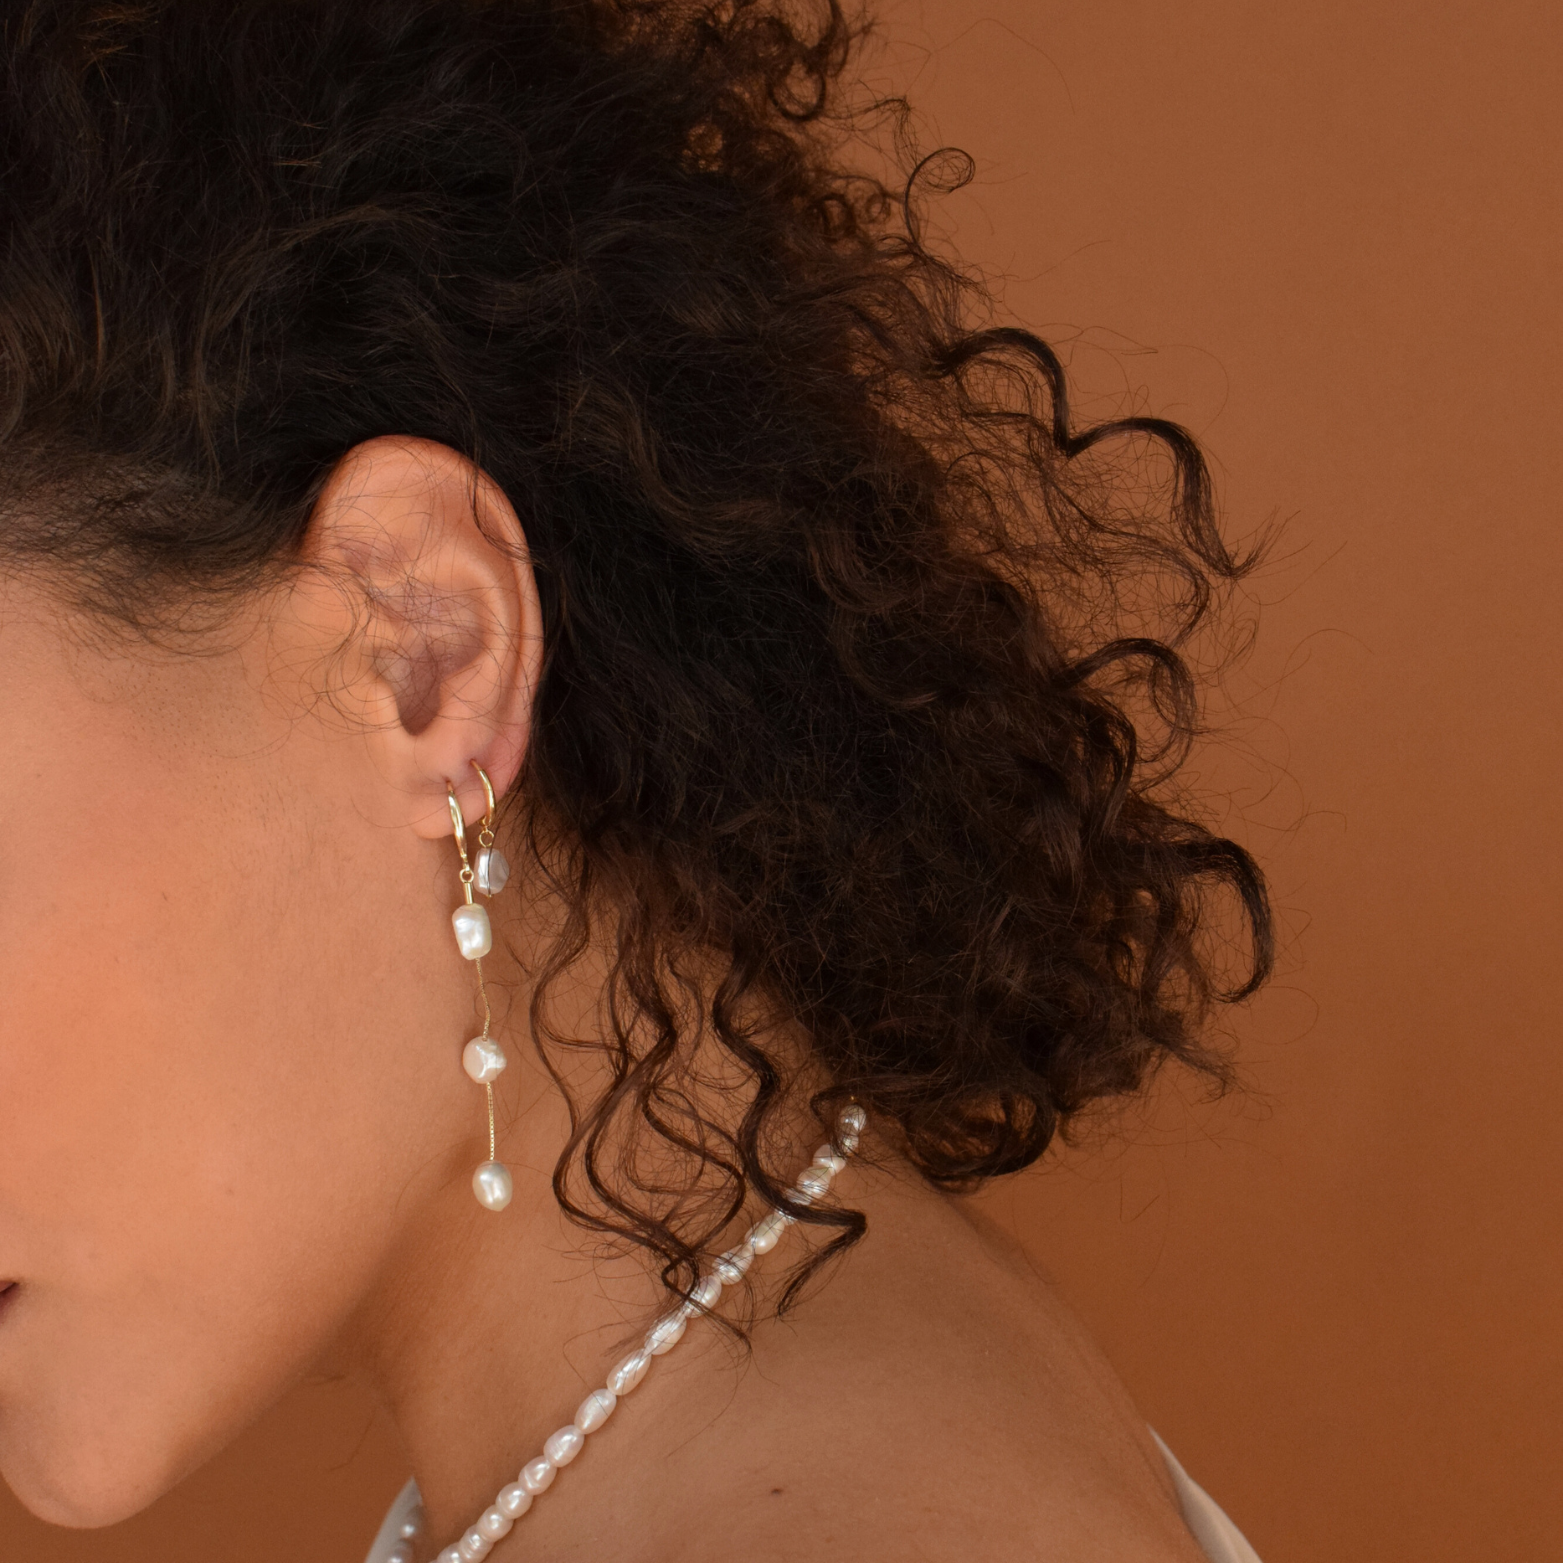 Profile view of a woman wearing the 14K Gold Plated Baroque Hoops